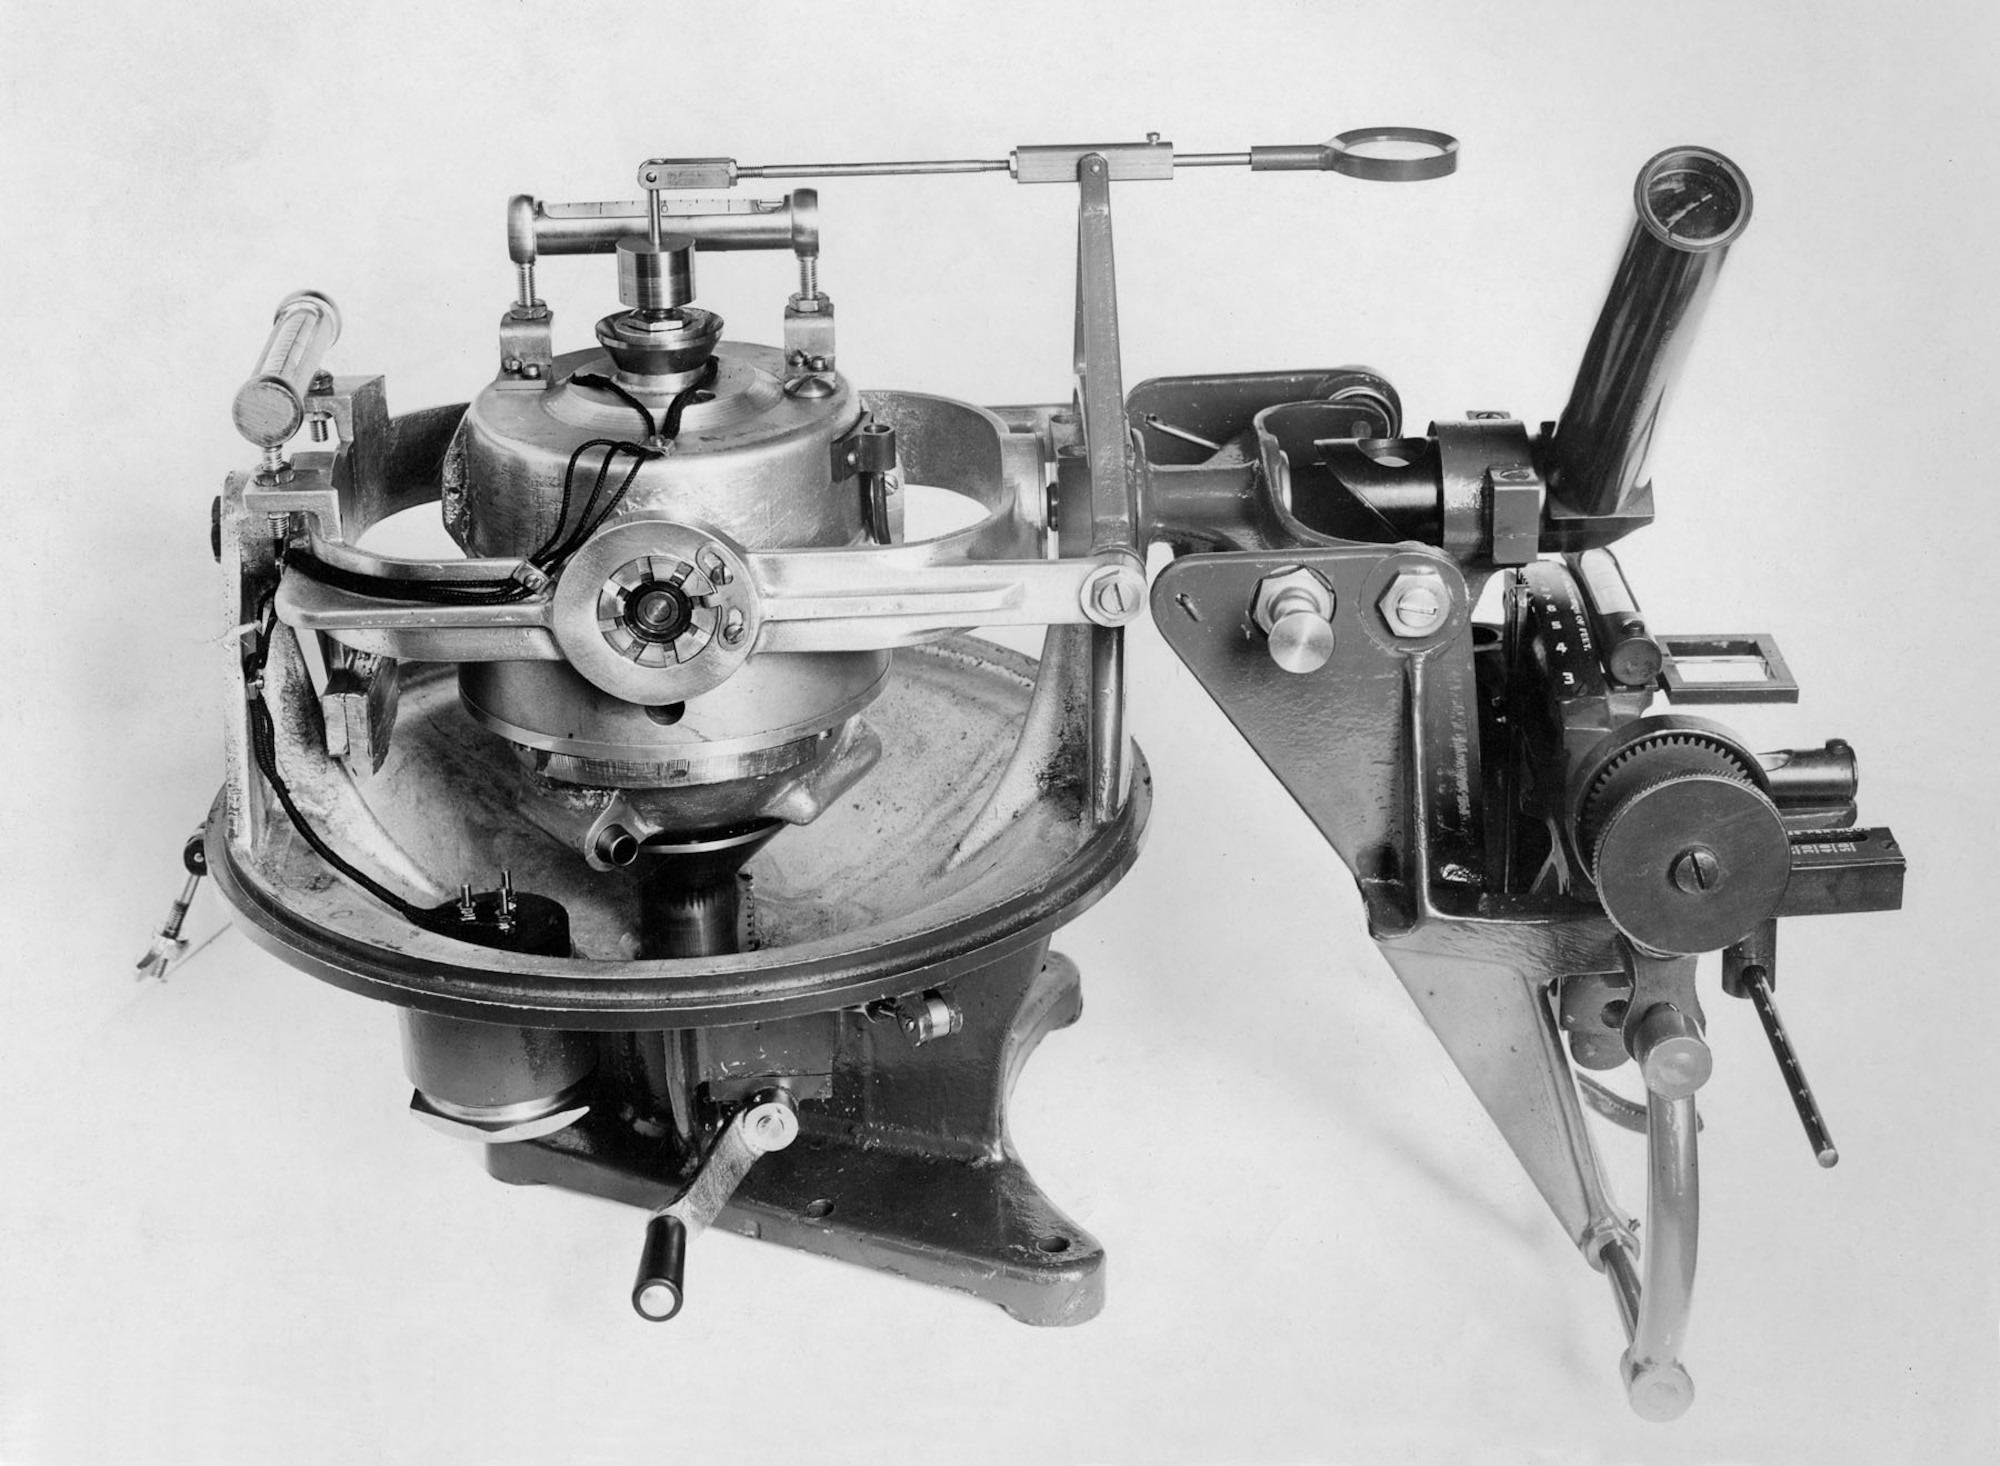 1922, the Sperry Gyroscope Company tried to improve the Mark I bombsight by attaching it to a Sperry gyroscope, but it failed to meet the Air Service’s needs. (U.S. Air Force photo)